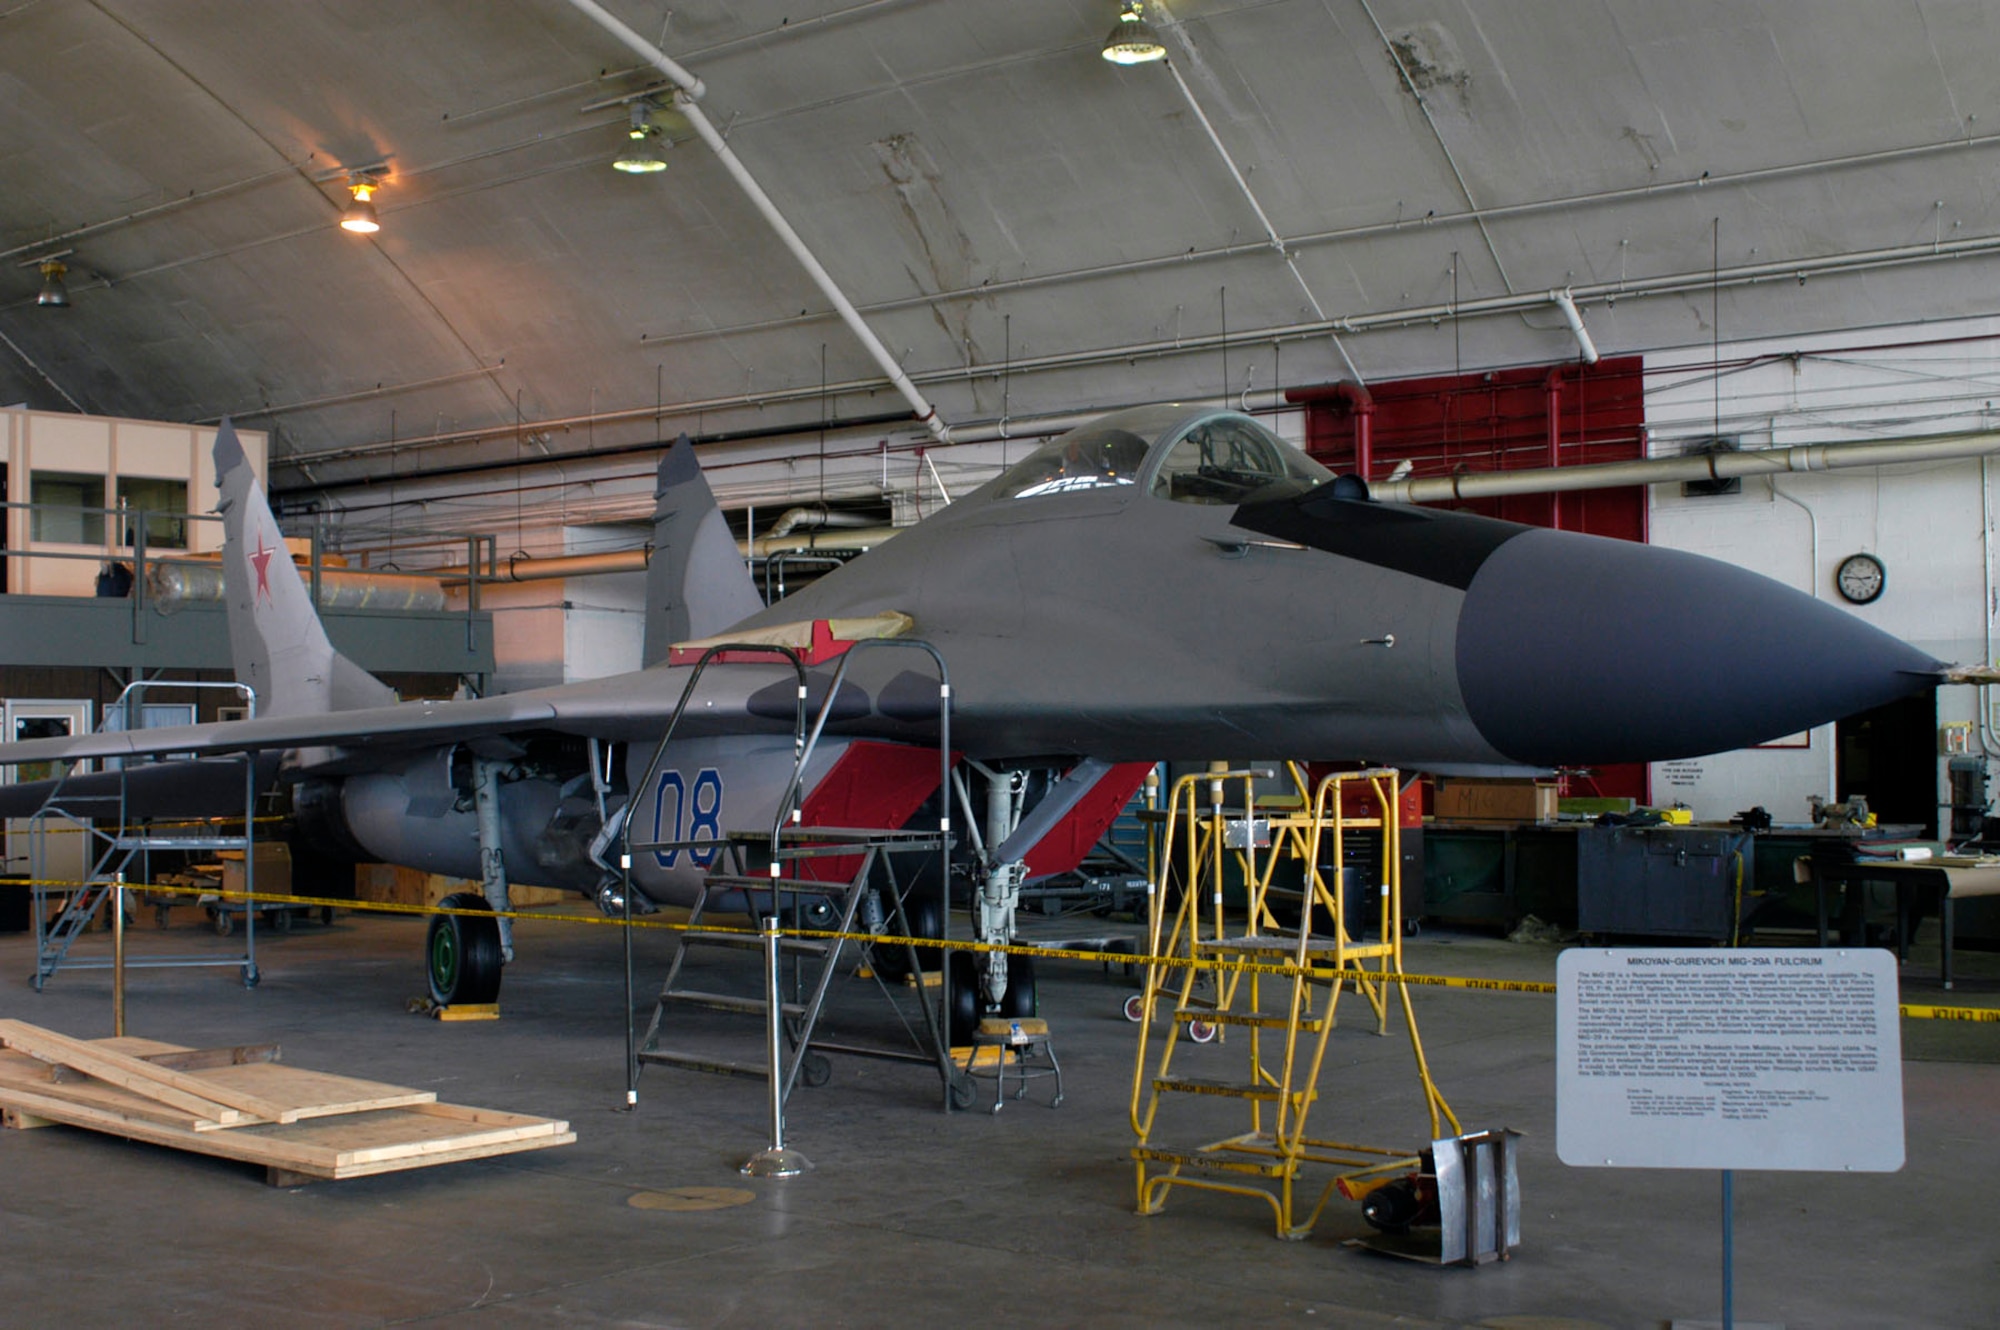 DAYTON, Ohio (06/2007) -- MiG-29A in the National Museum of the U.S. Air Force's restoration hangar. (U.S. Air Force photo)